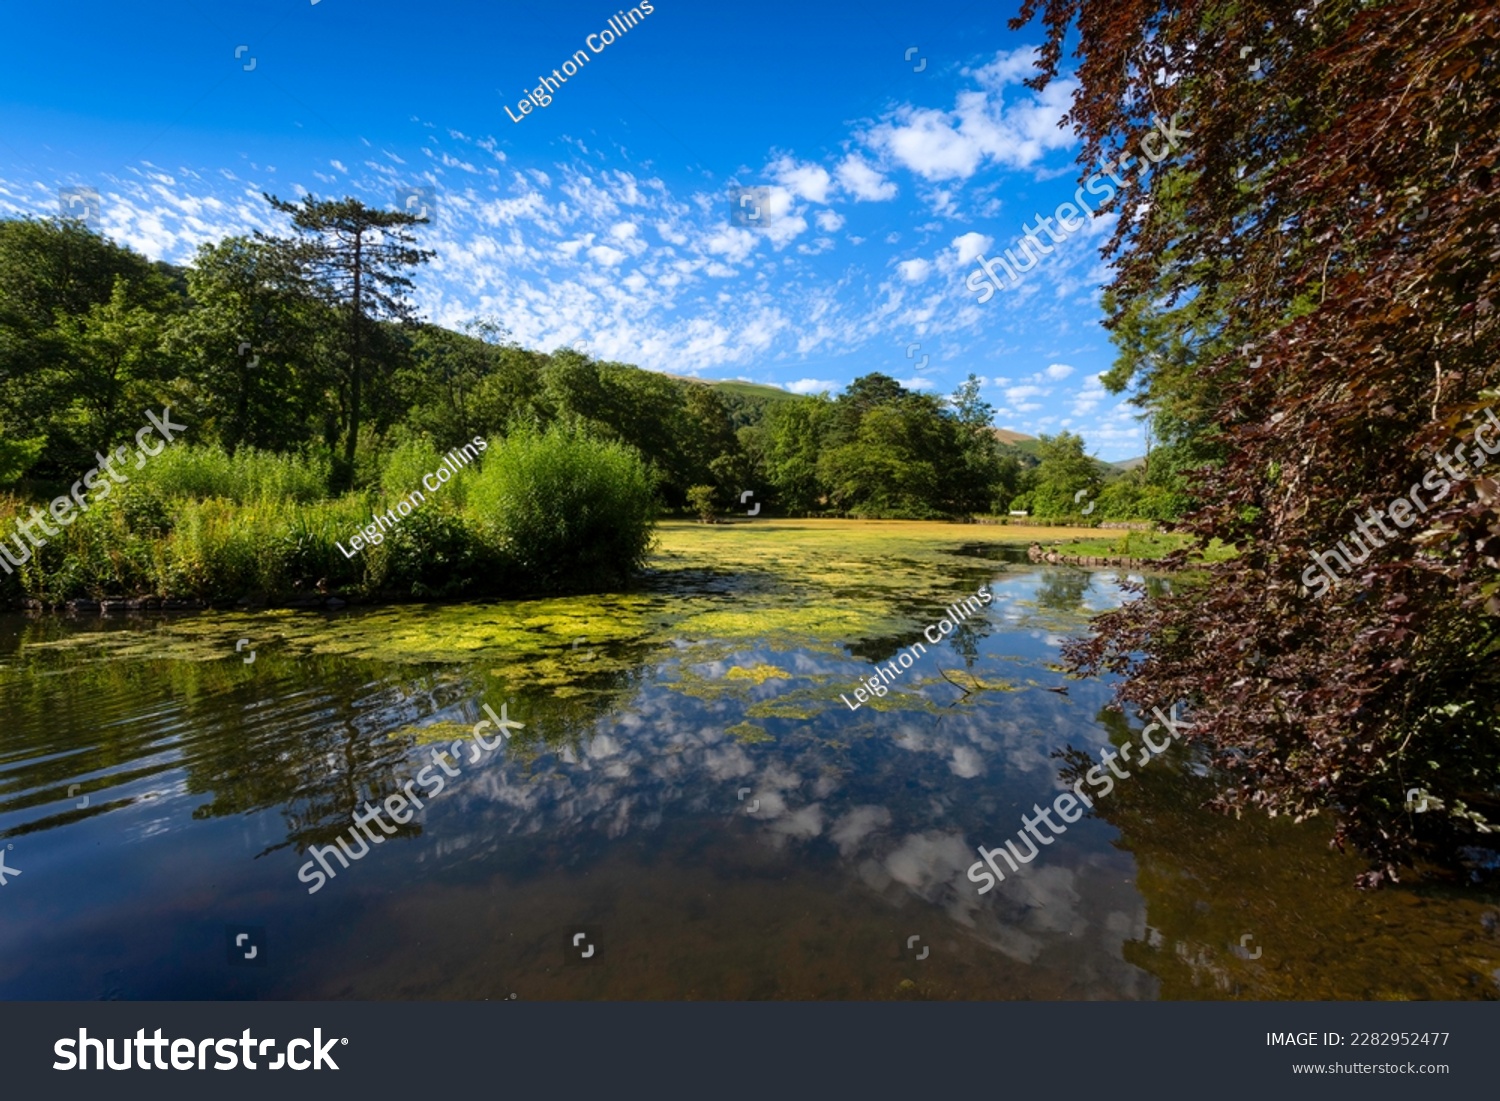 The lake at Craig y Nos Country park in the Swansea Valley, South Wales UK.
 #2282952477